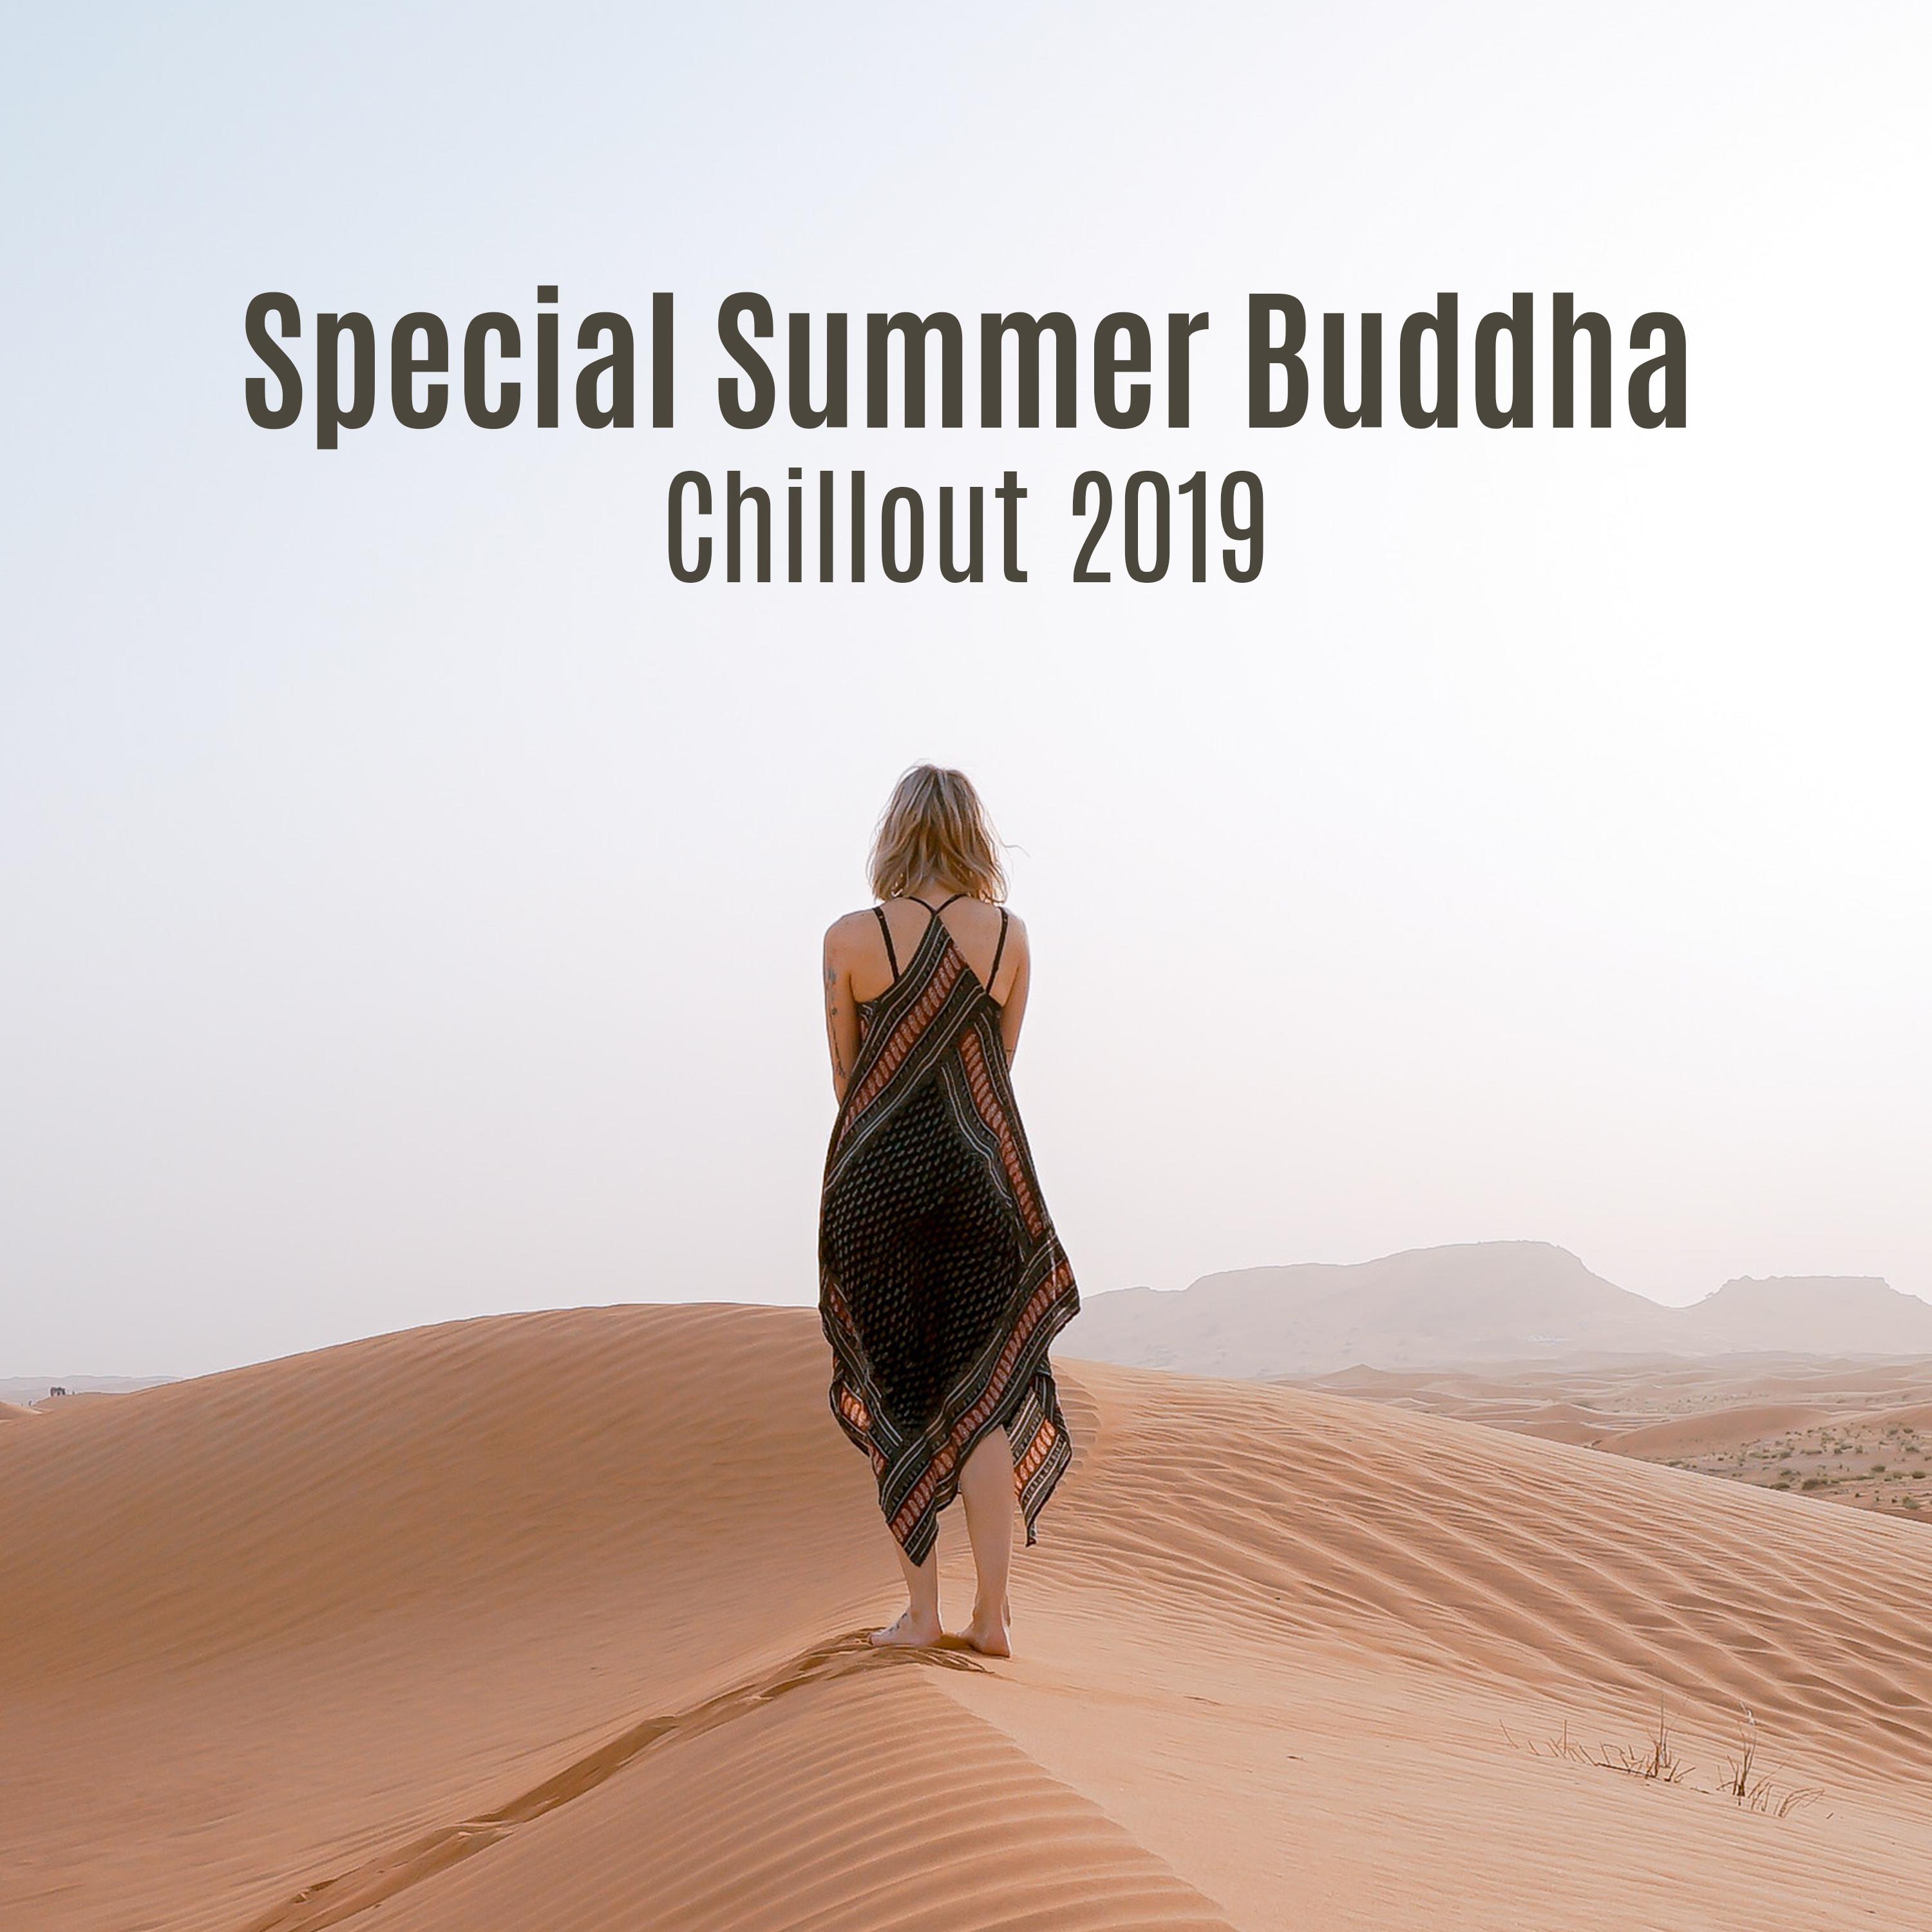 Special Summer Buddha Chillout 2019 (Arabic House Music)